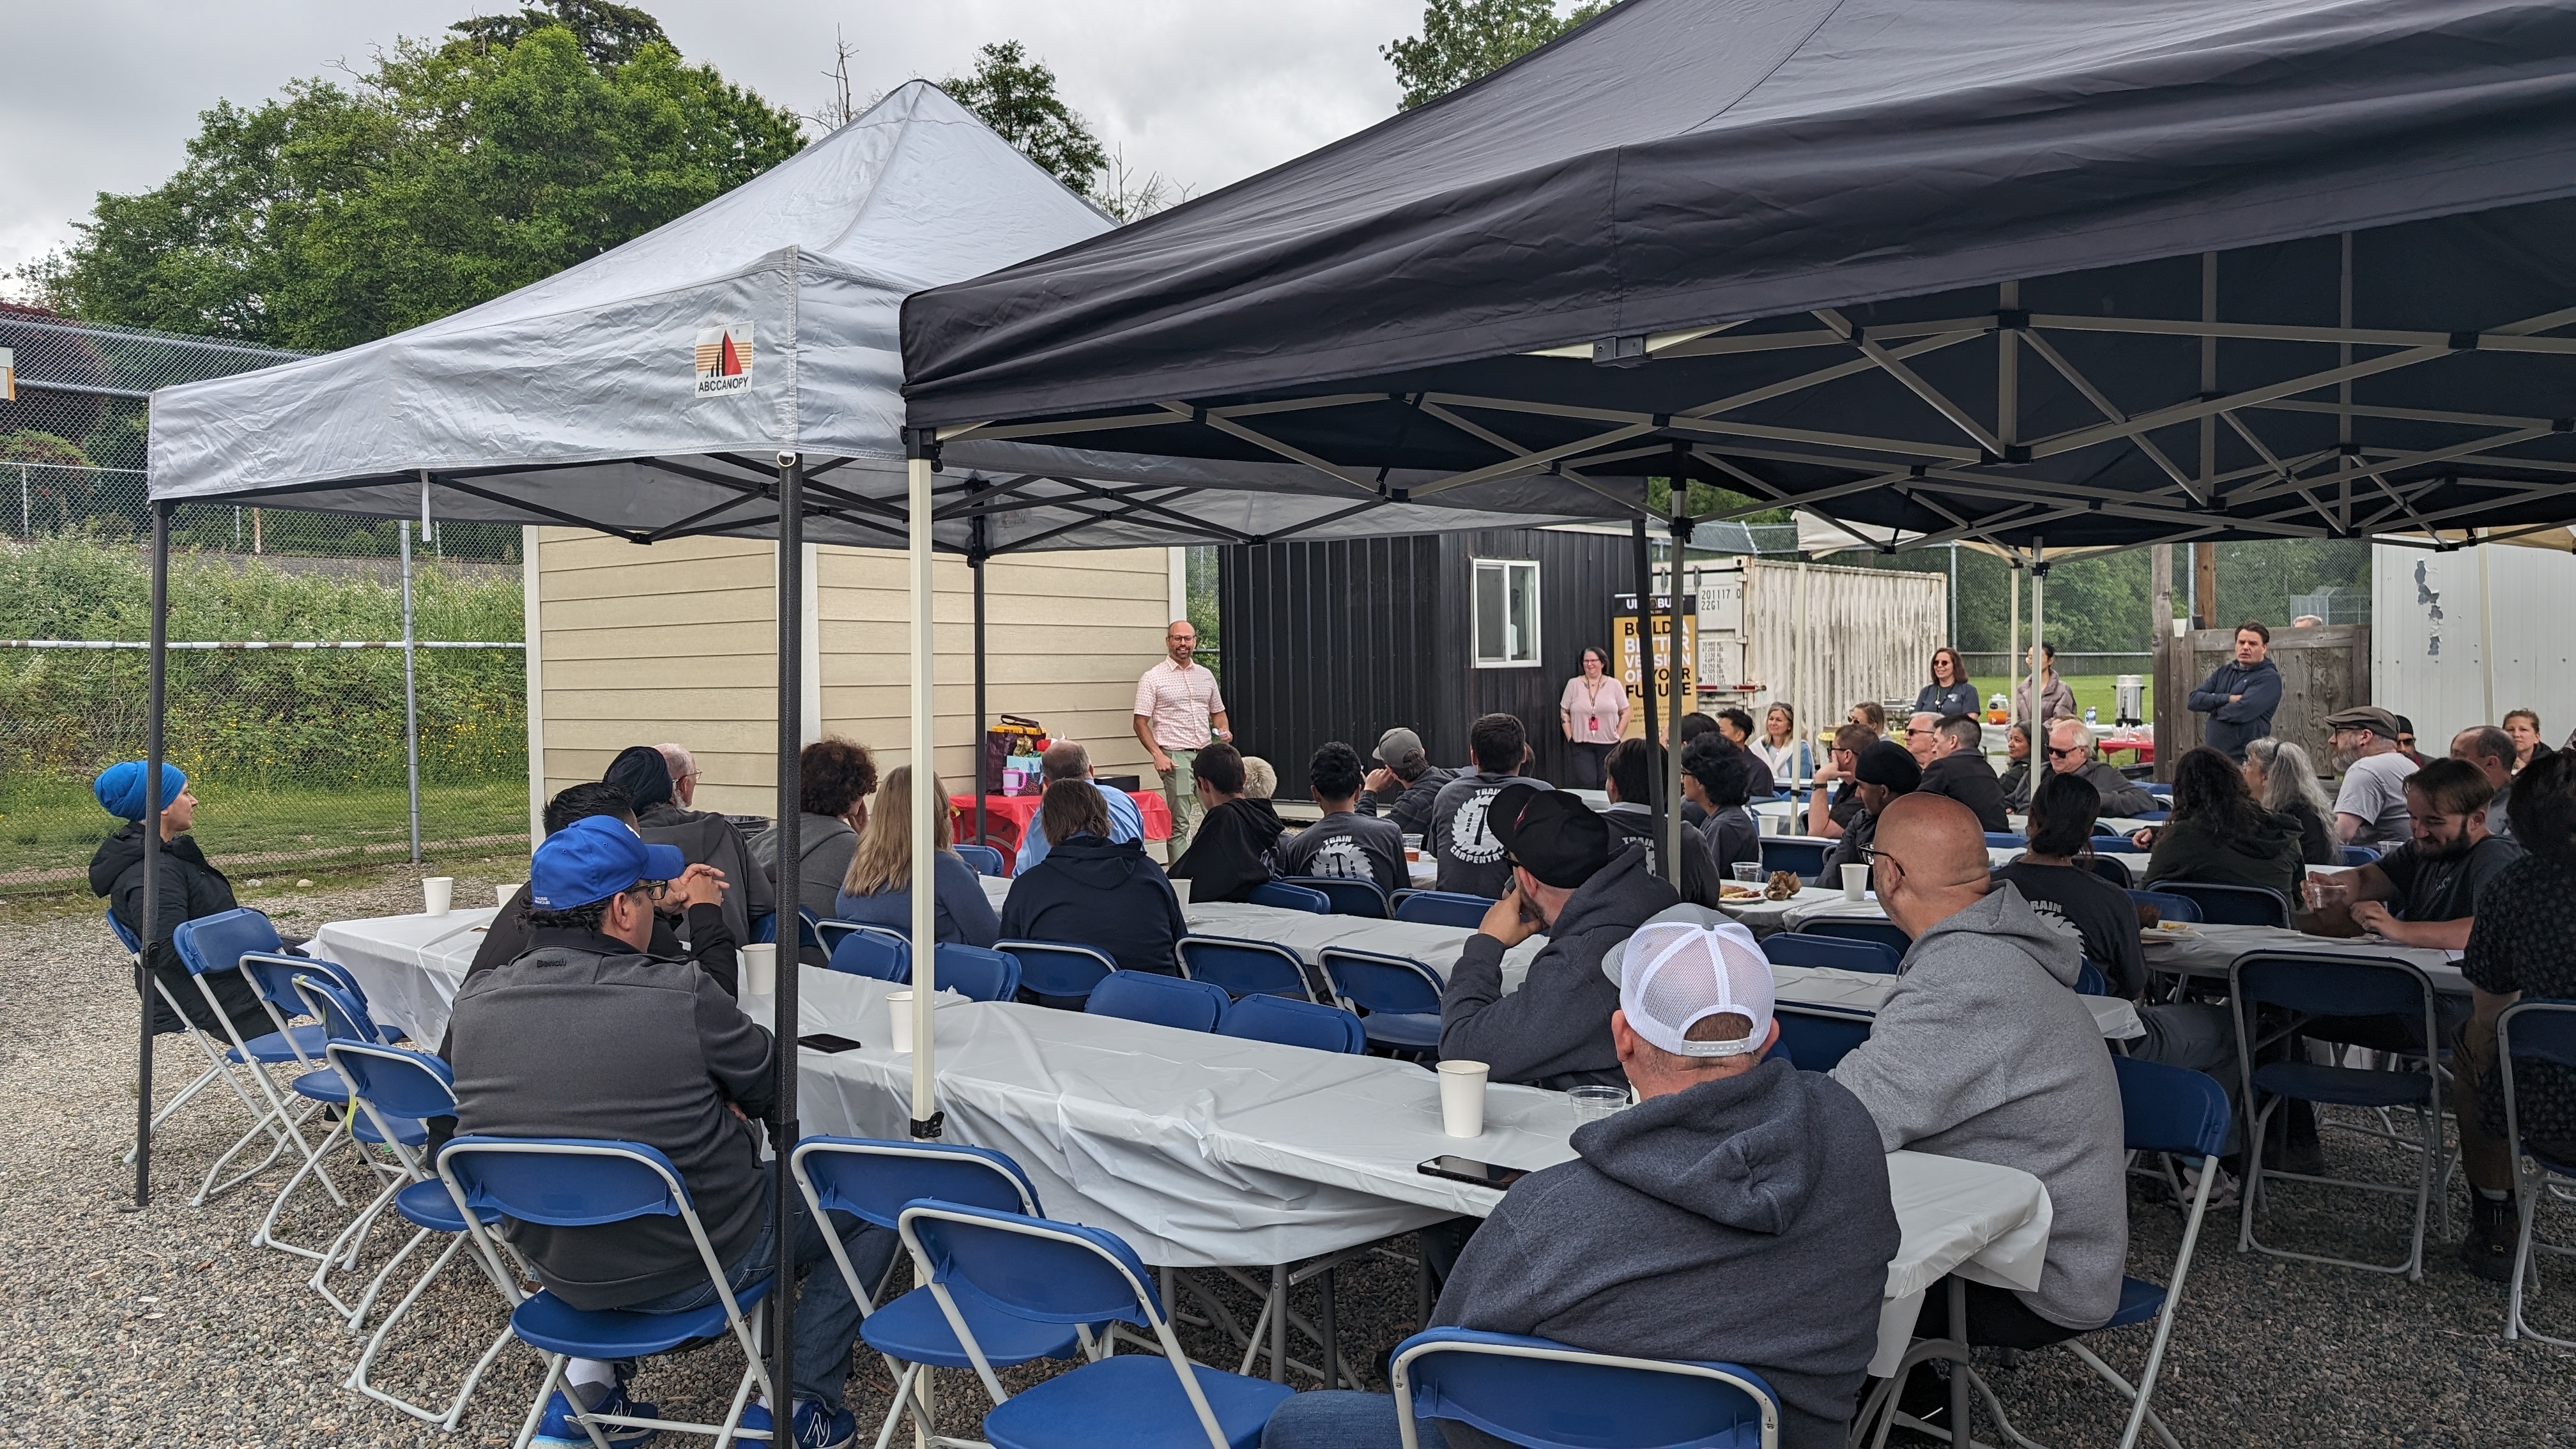 Group of people all sitting on rows of tables outside under an event tent. They are all looking away from the camera to the speaker standing in front of one of the tiny houses that were built.